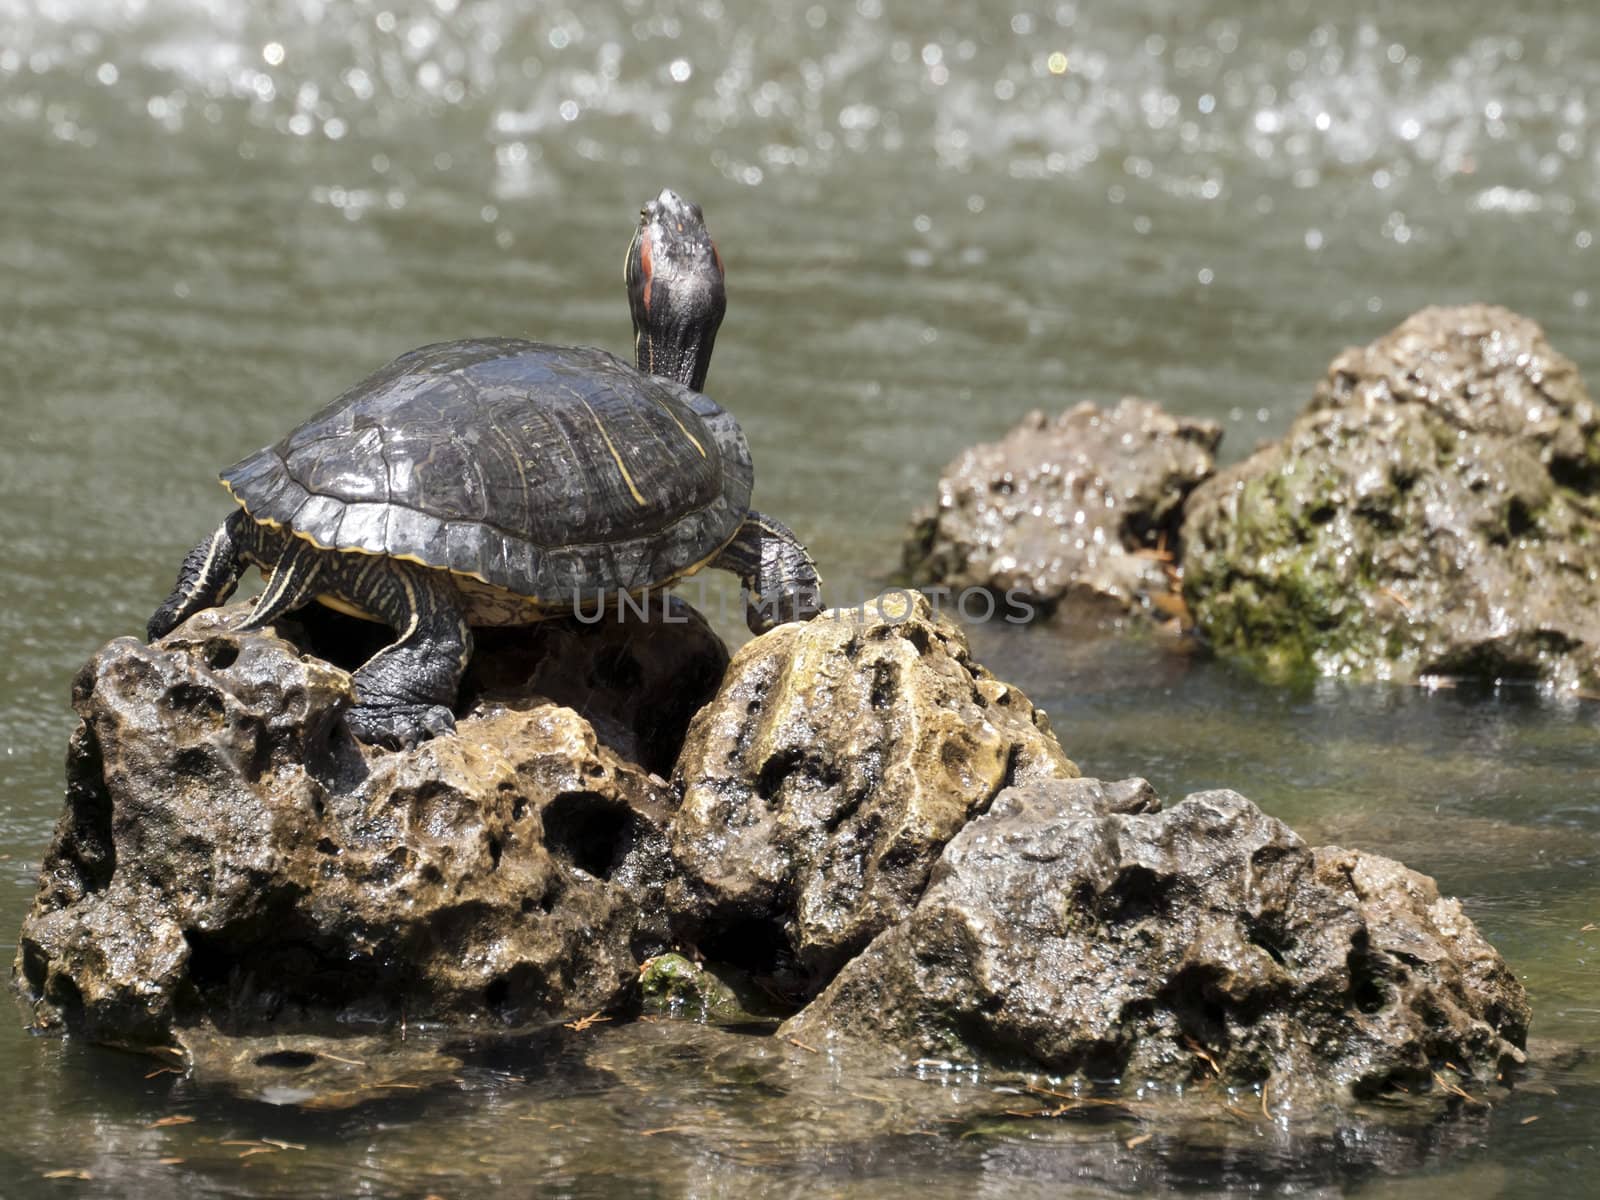 Freshwater turtle basking in the sun in a garden pond